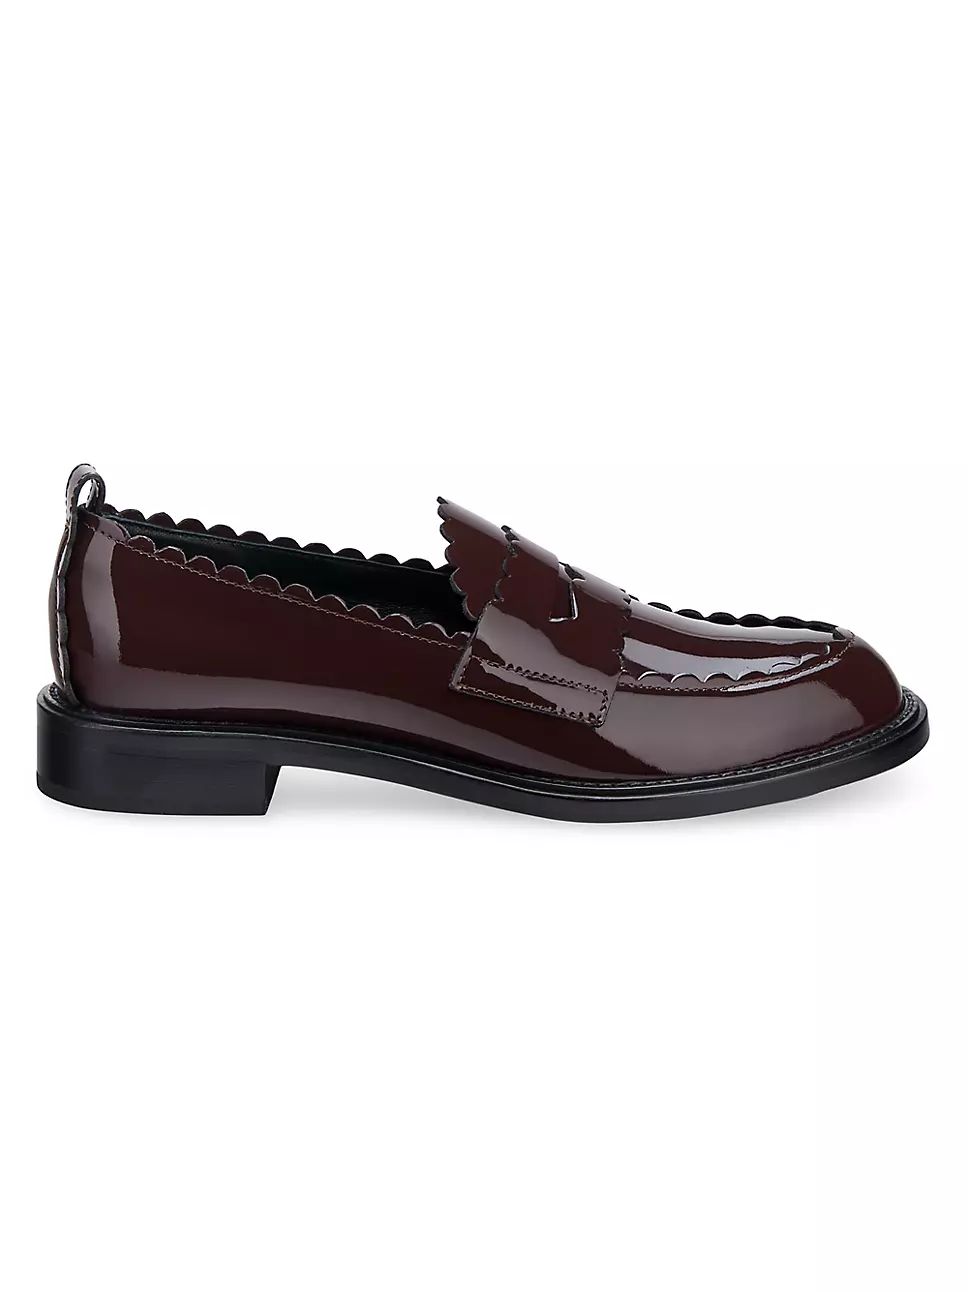 Janise Patent Leather Penny Loafers | Saks Fifth Avenue